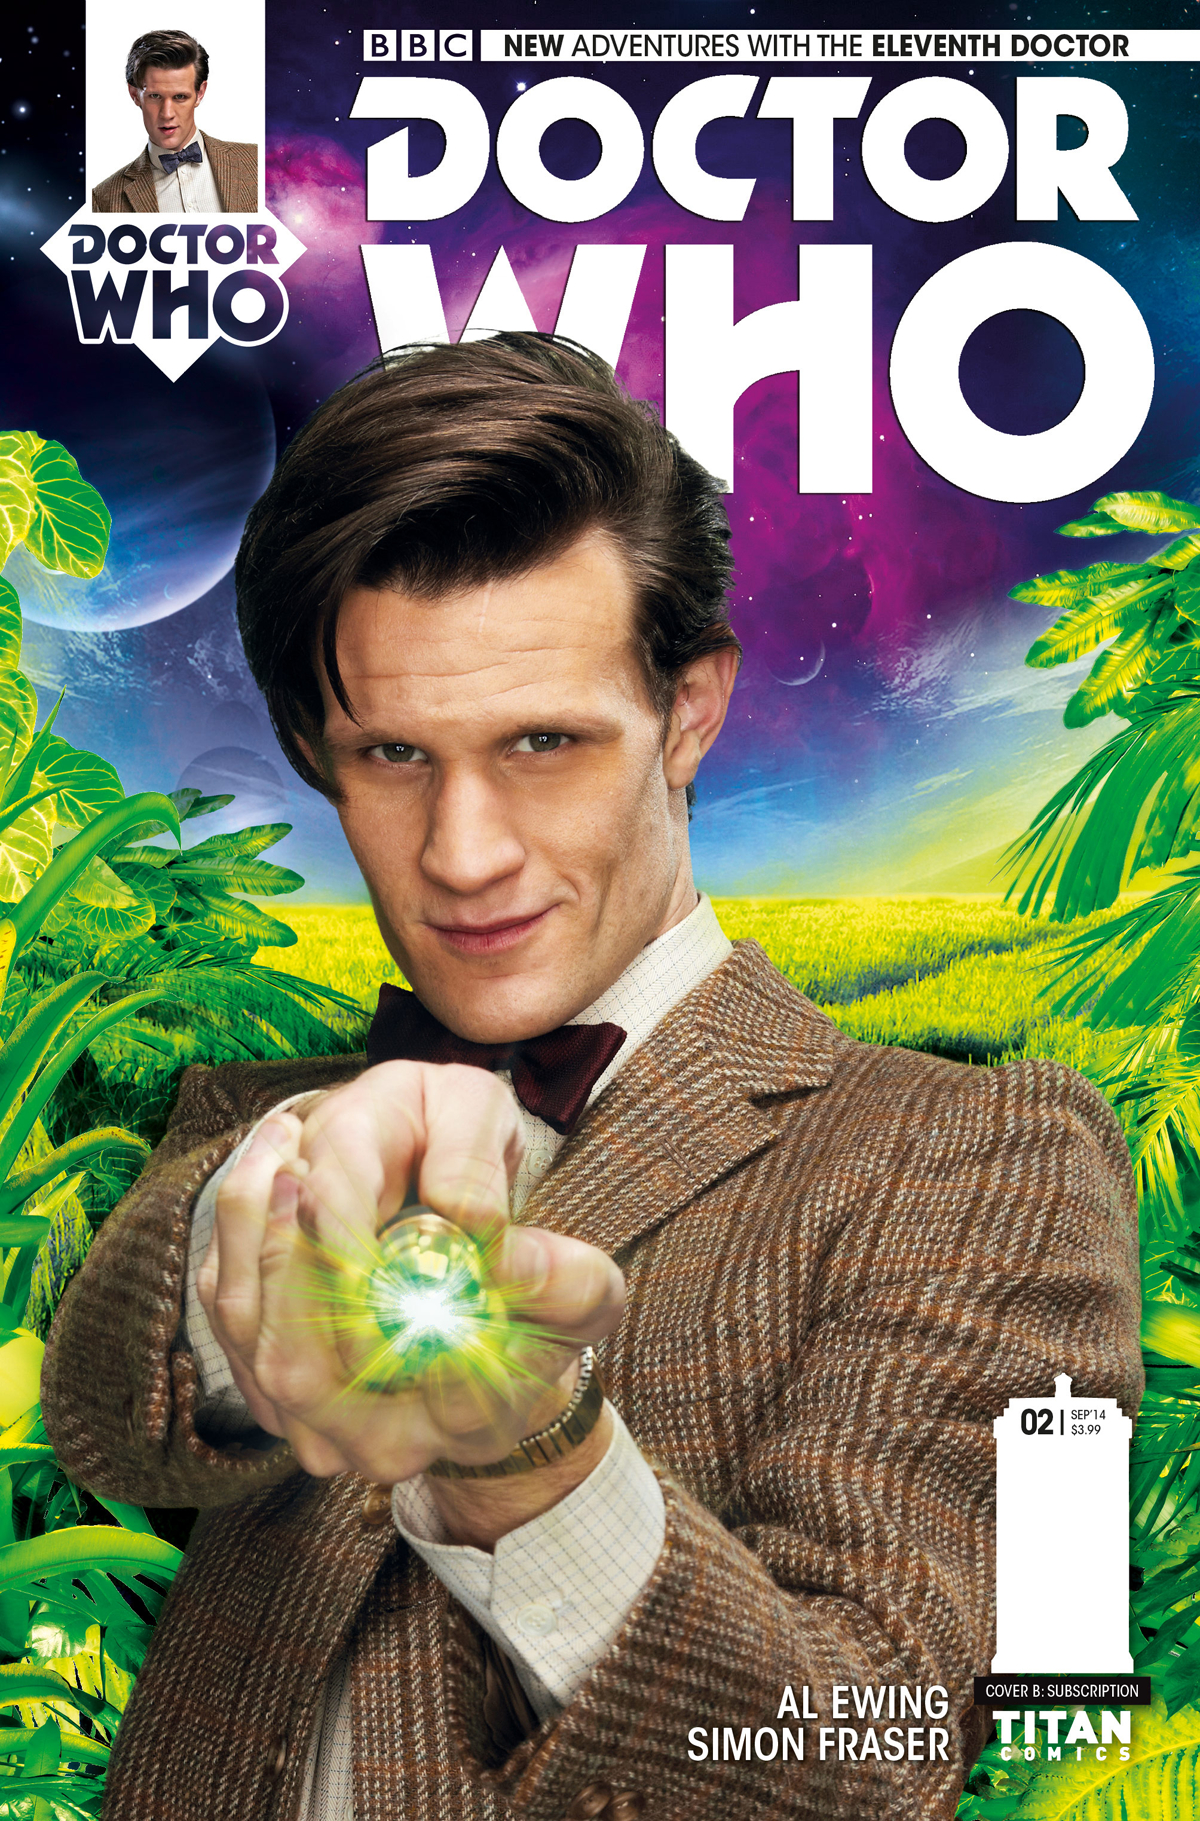 DOCTOR WHO 11TH #2 SUBSCRIPTION PHOTO